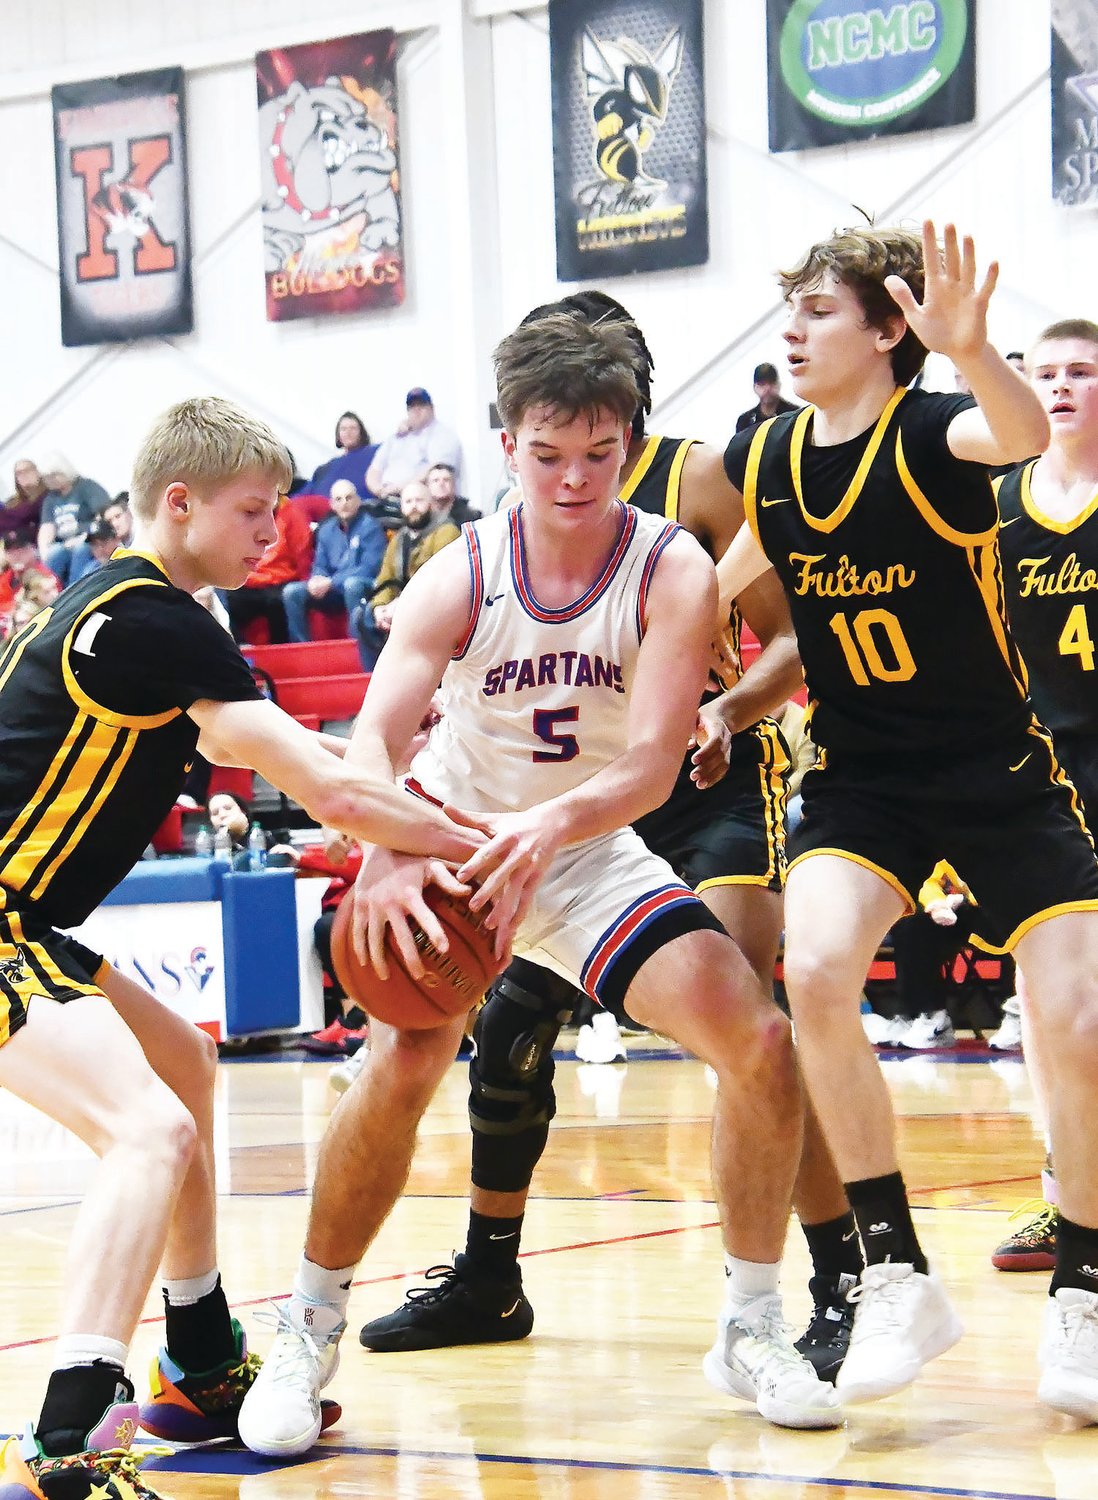 Collin Huffman of Moberly attempts to gather a rebound while harassed by two Fulton players during a conference game on Jan. 17.